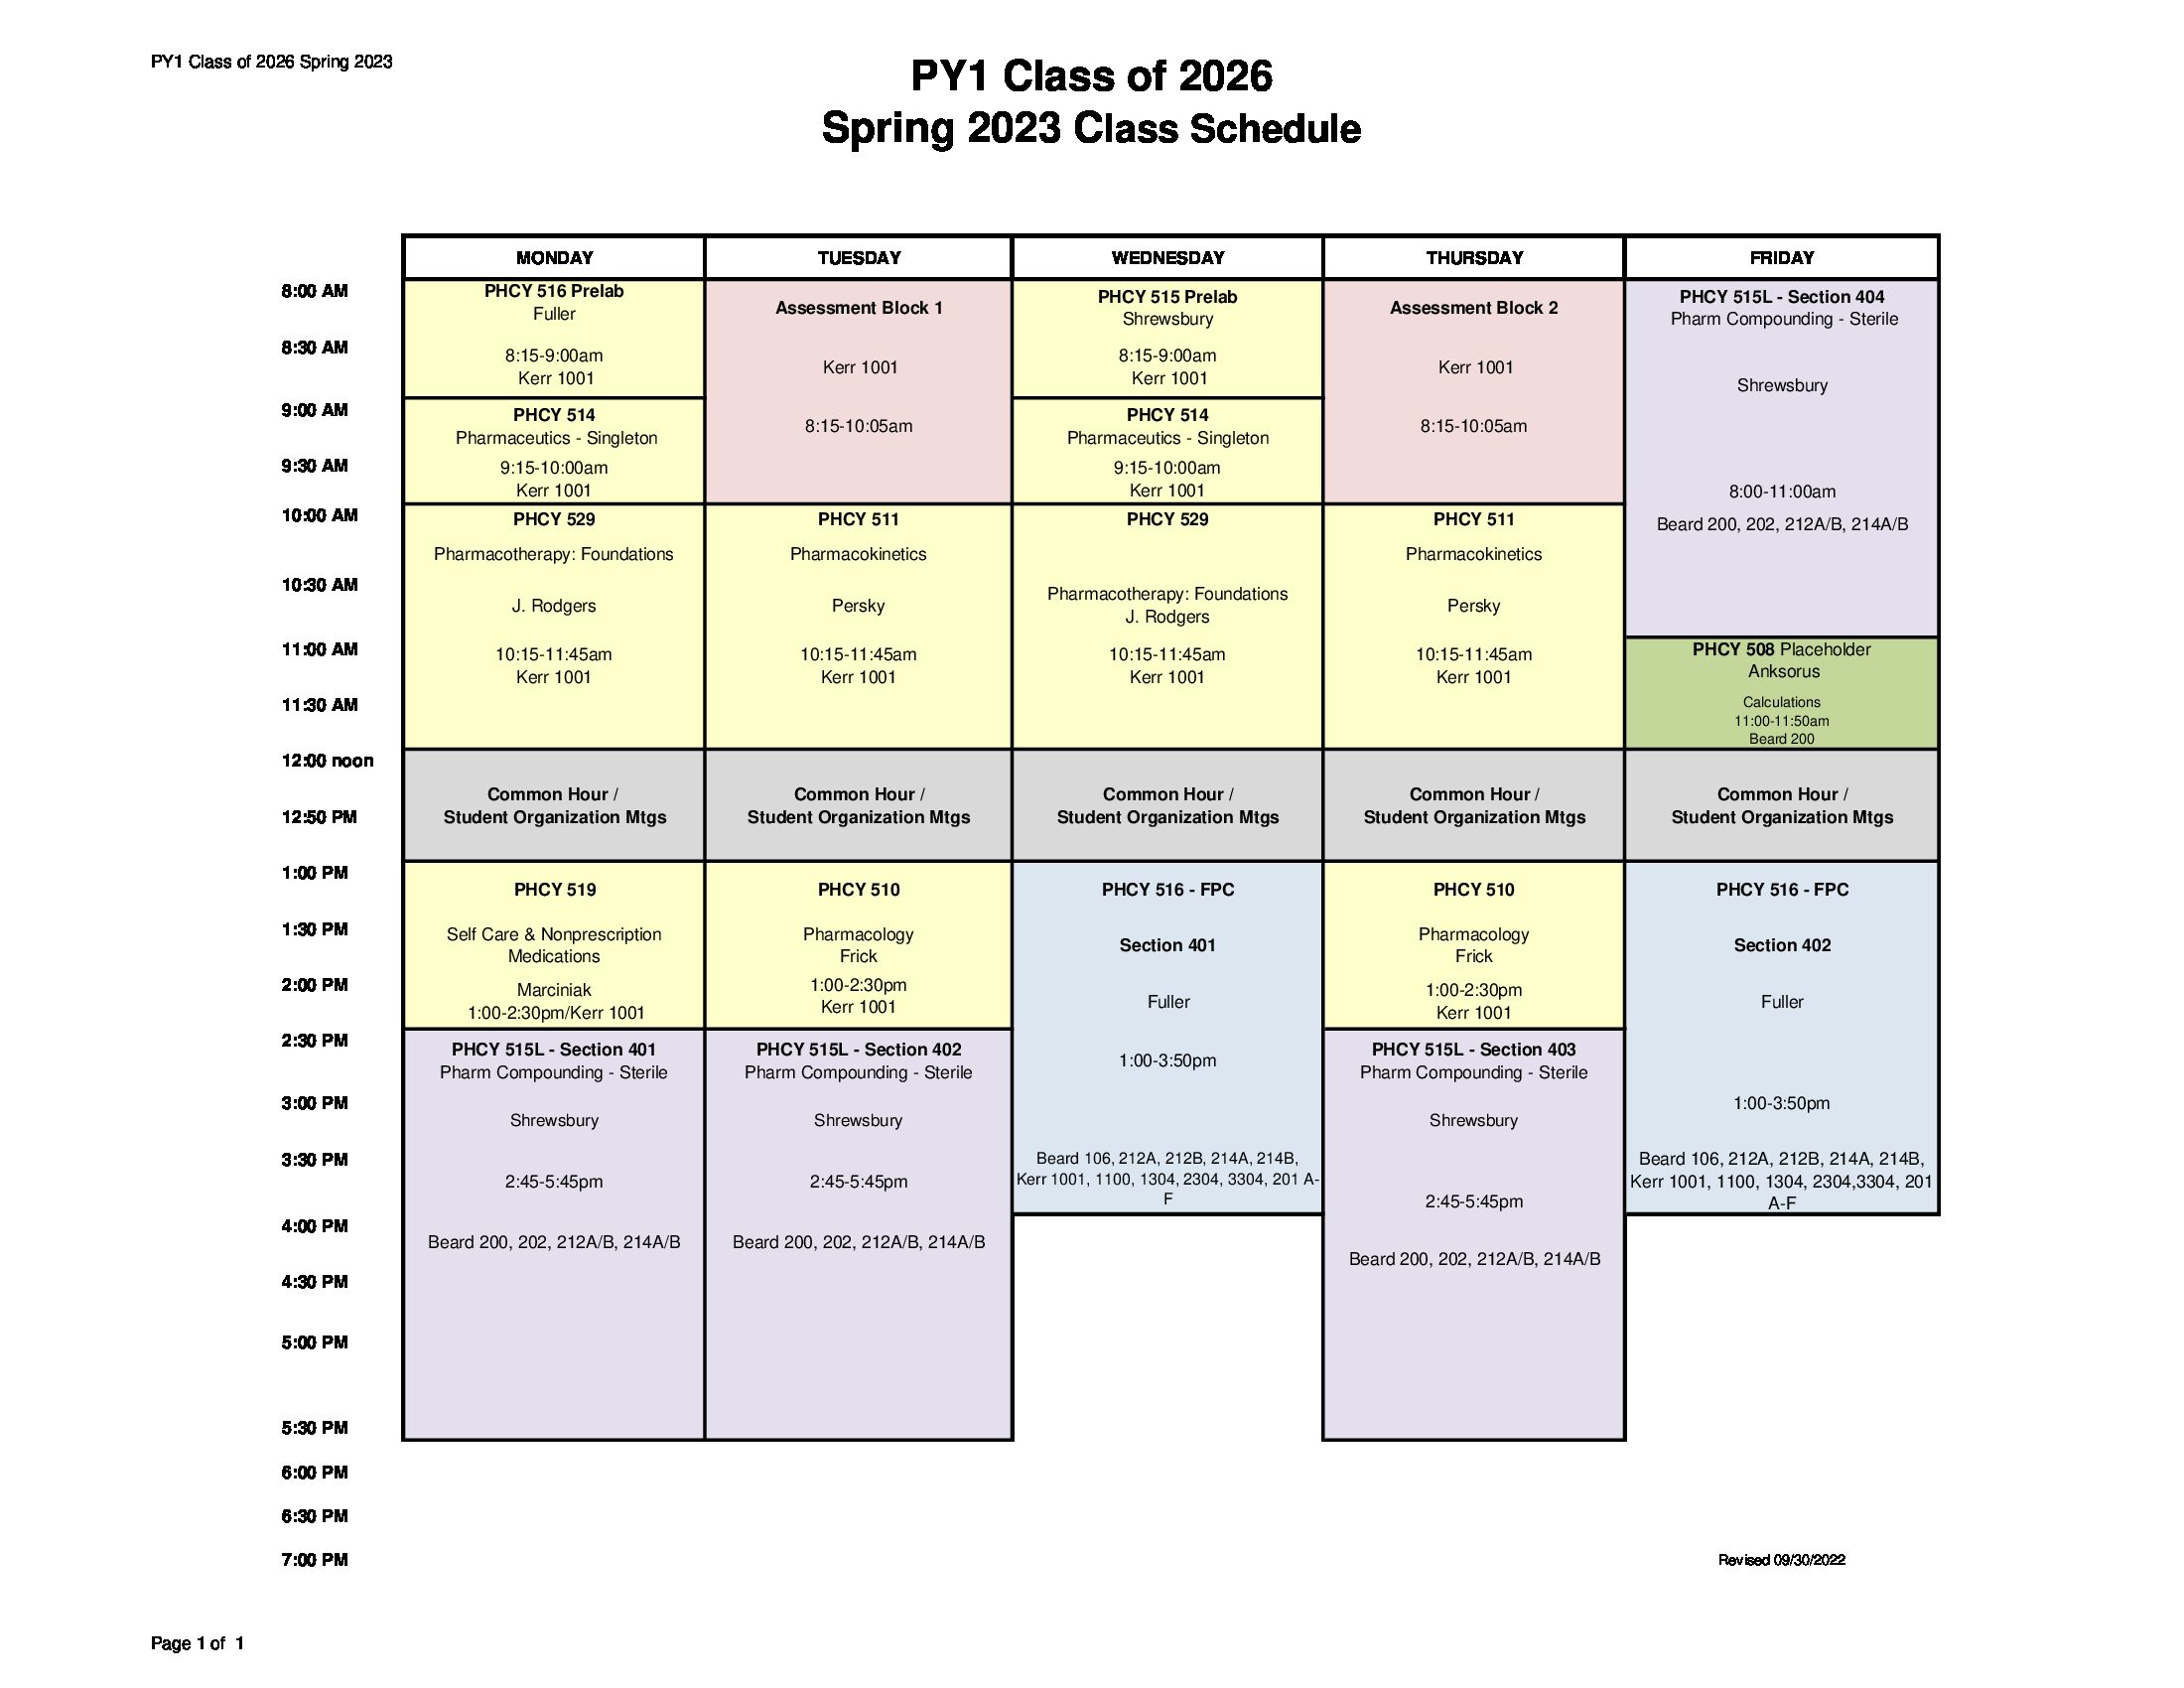 Spring 2023 Classes — Home